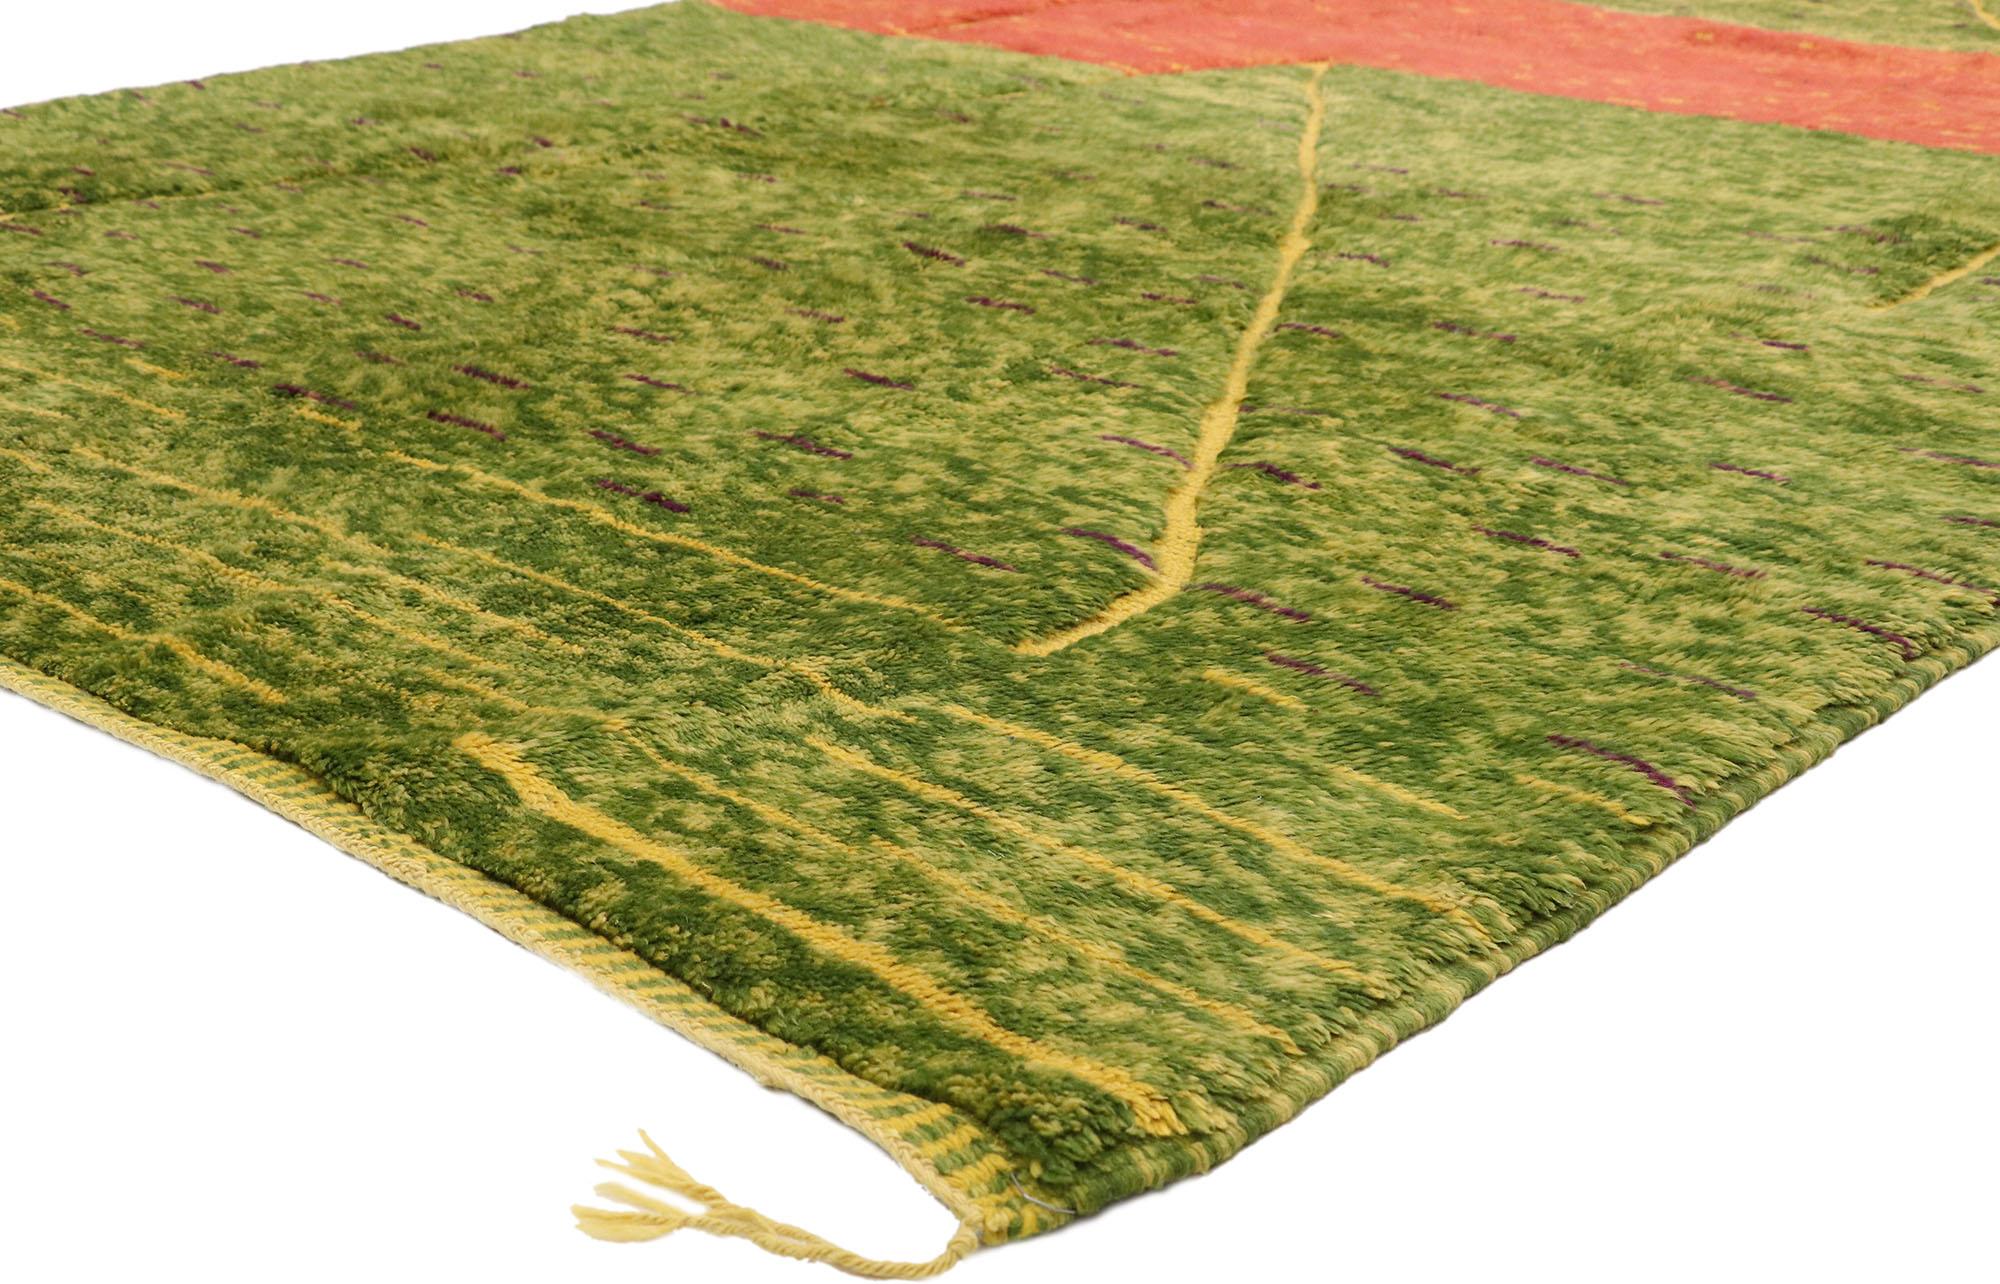 21037 Modern Green Beni Mrirt Moroccan Rug, 06'11 x 10'06. Beni Mrirt rugs epitomize a treasured tradition of Moroccan weaving, renowned for their luxurious texture, geometric designs, and soothing earth tones. Crafted by skilled artisans of the